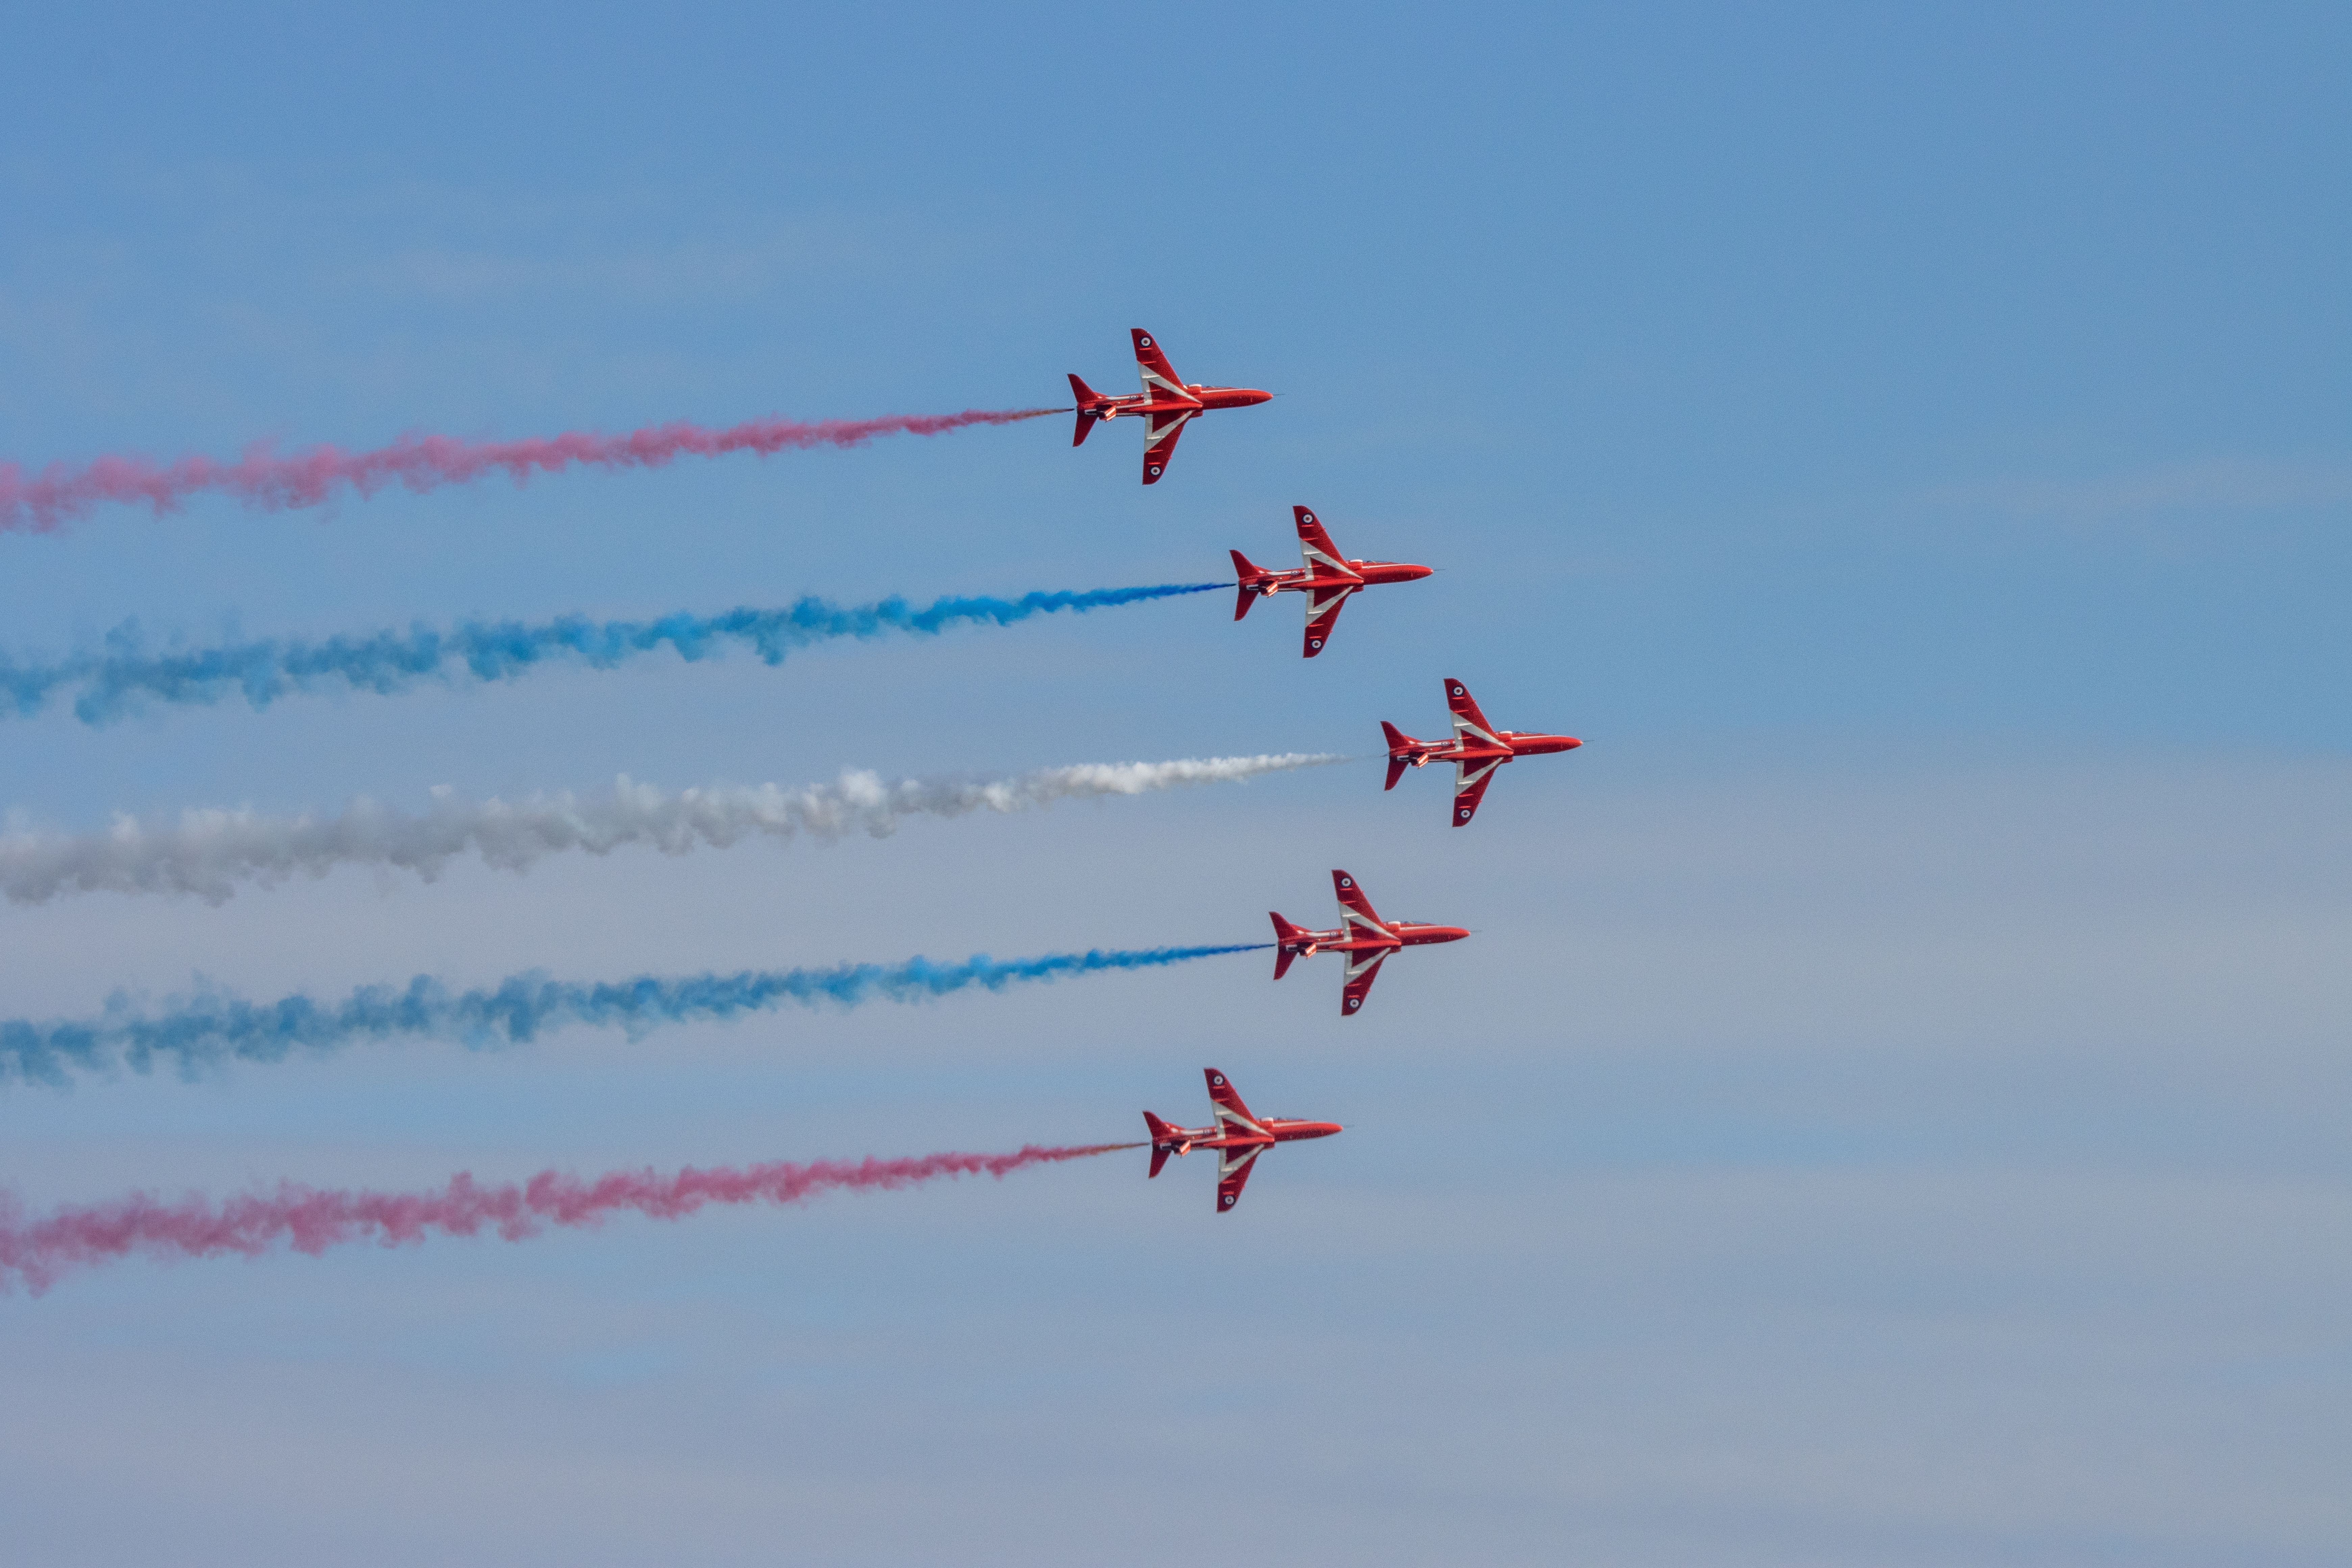 Five Red Arrows BAE Hawks With Tricolor Smoke Trails Flying in the sky.